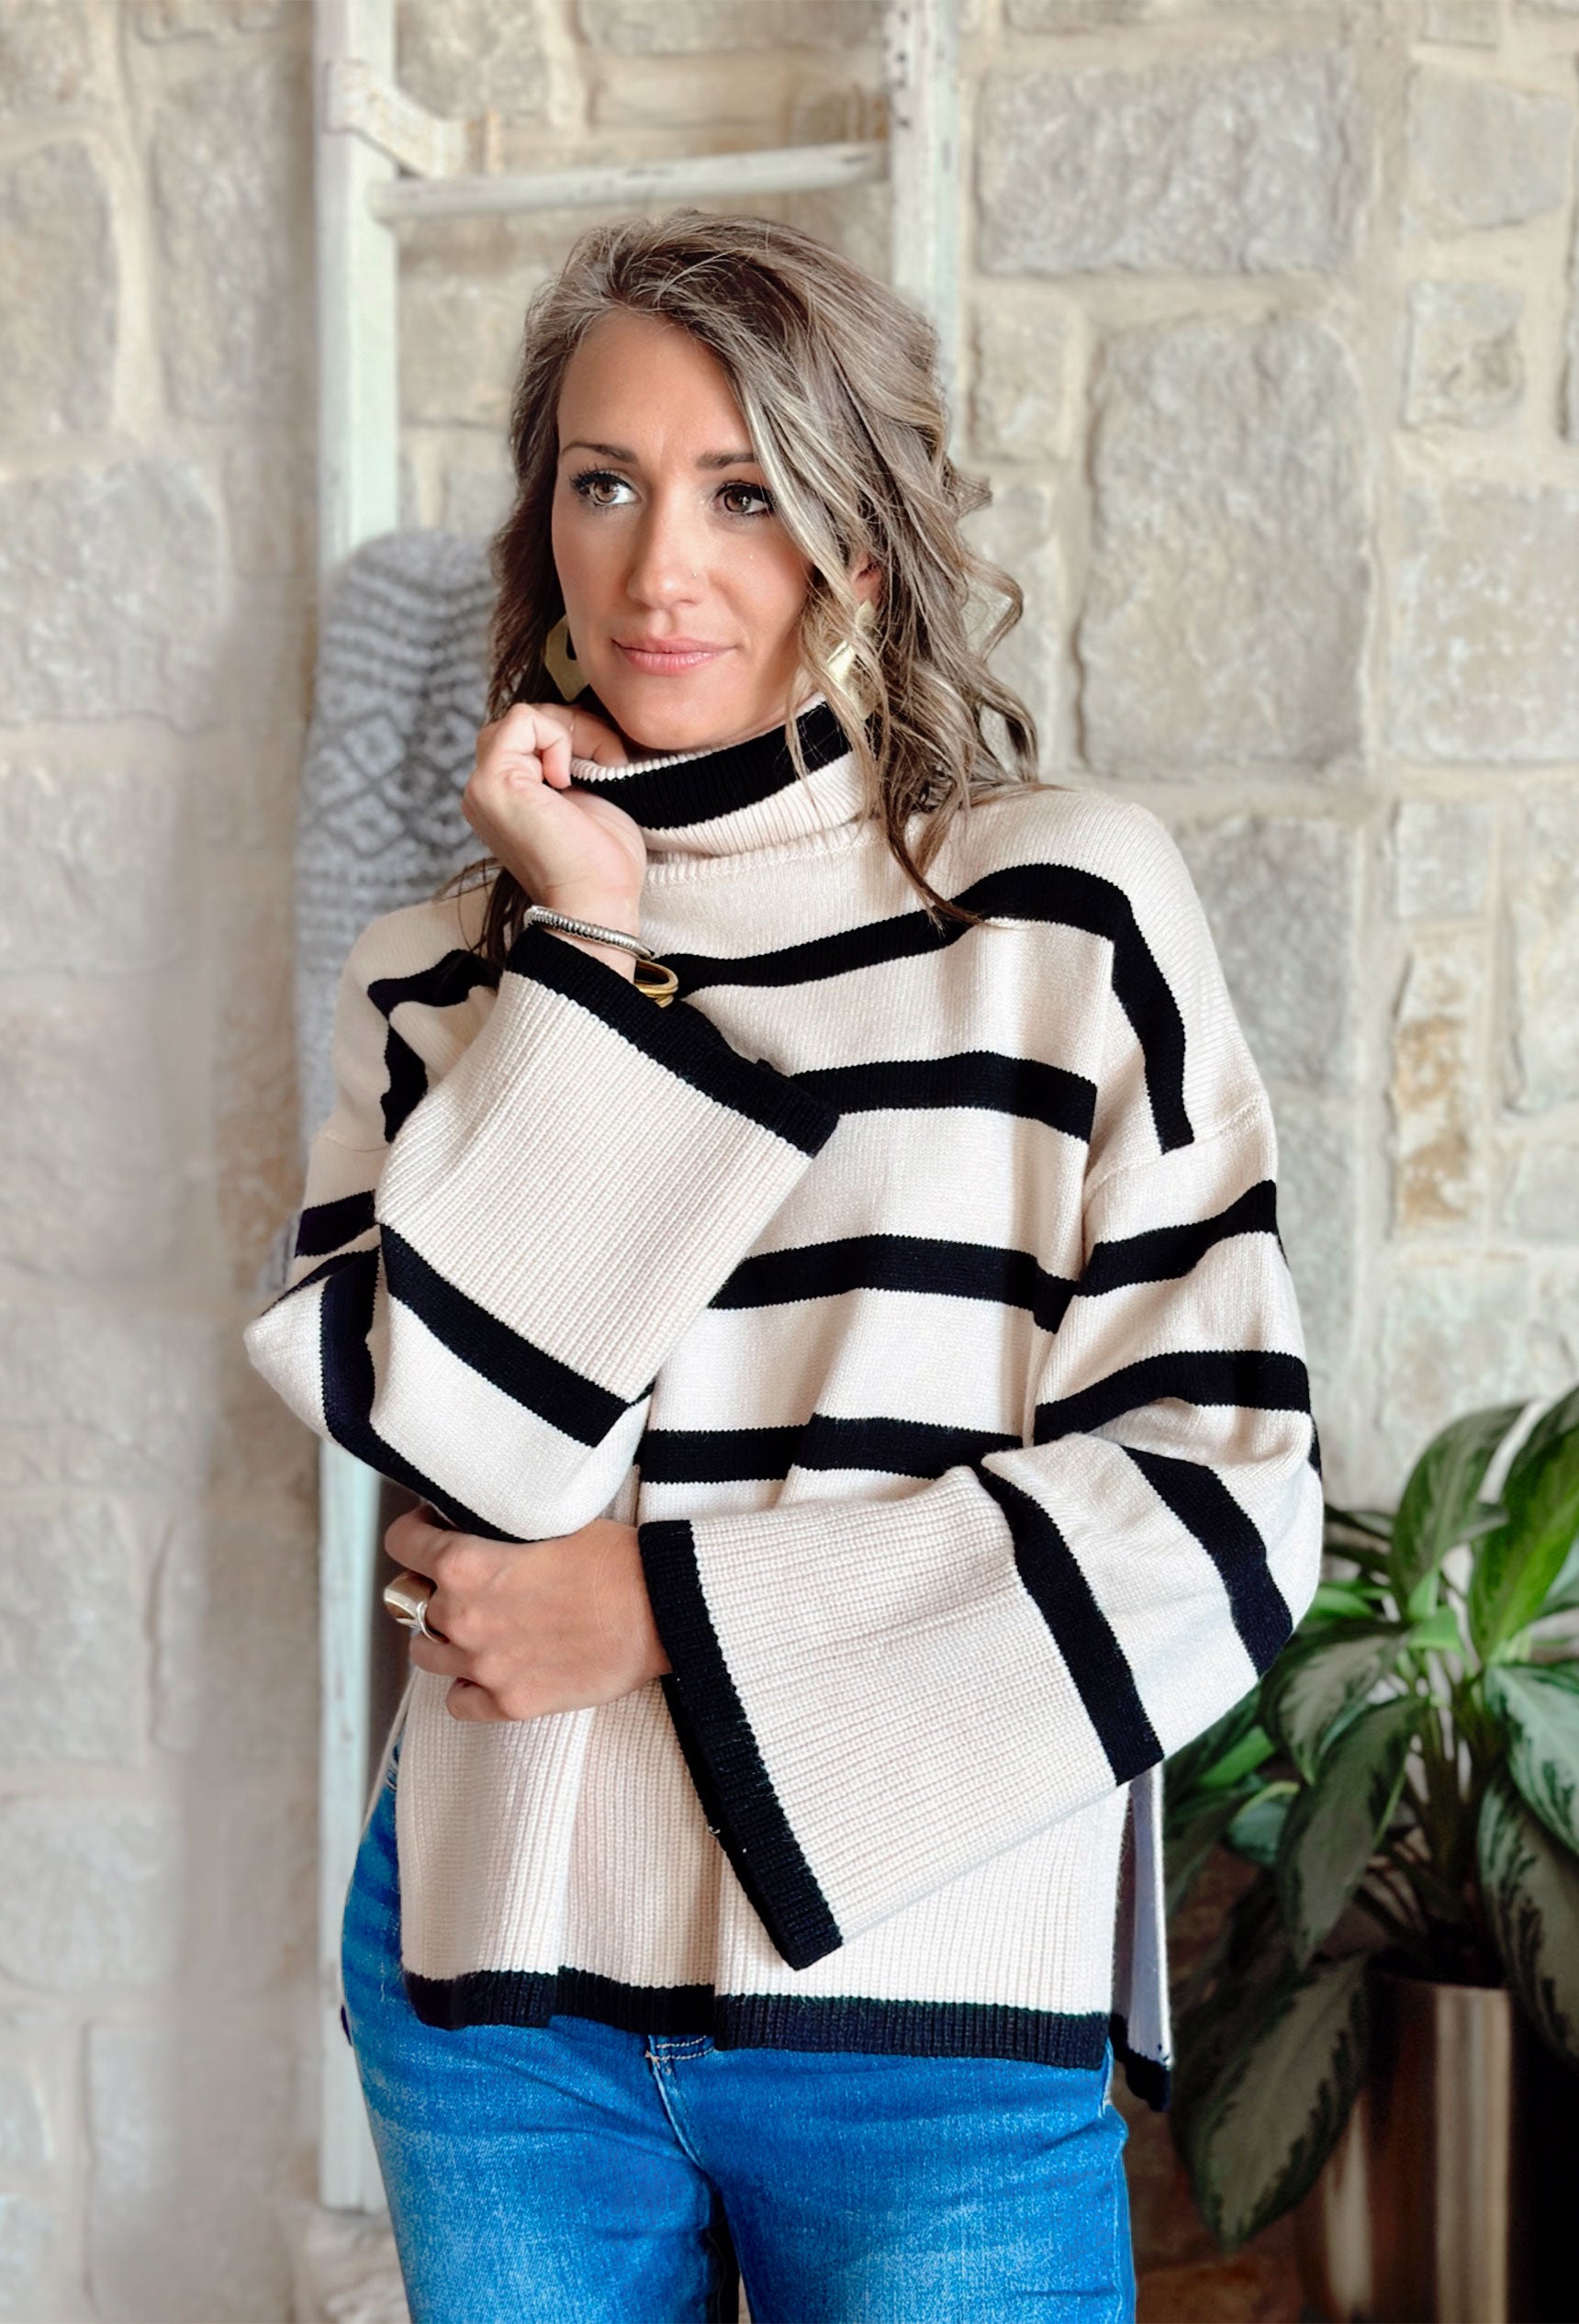 Cider in Soho Sweater, black and cream striped turtle neck sweater with wide sleeves and slits on the sides